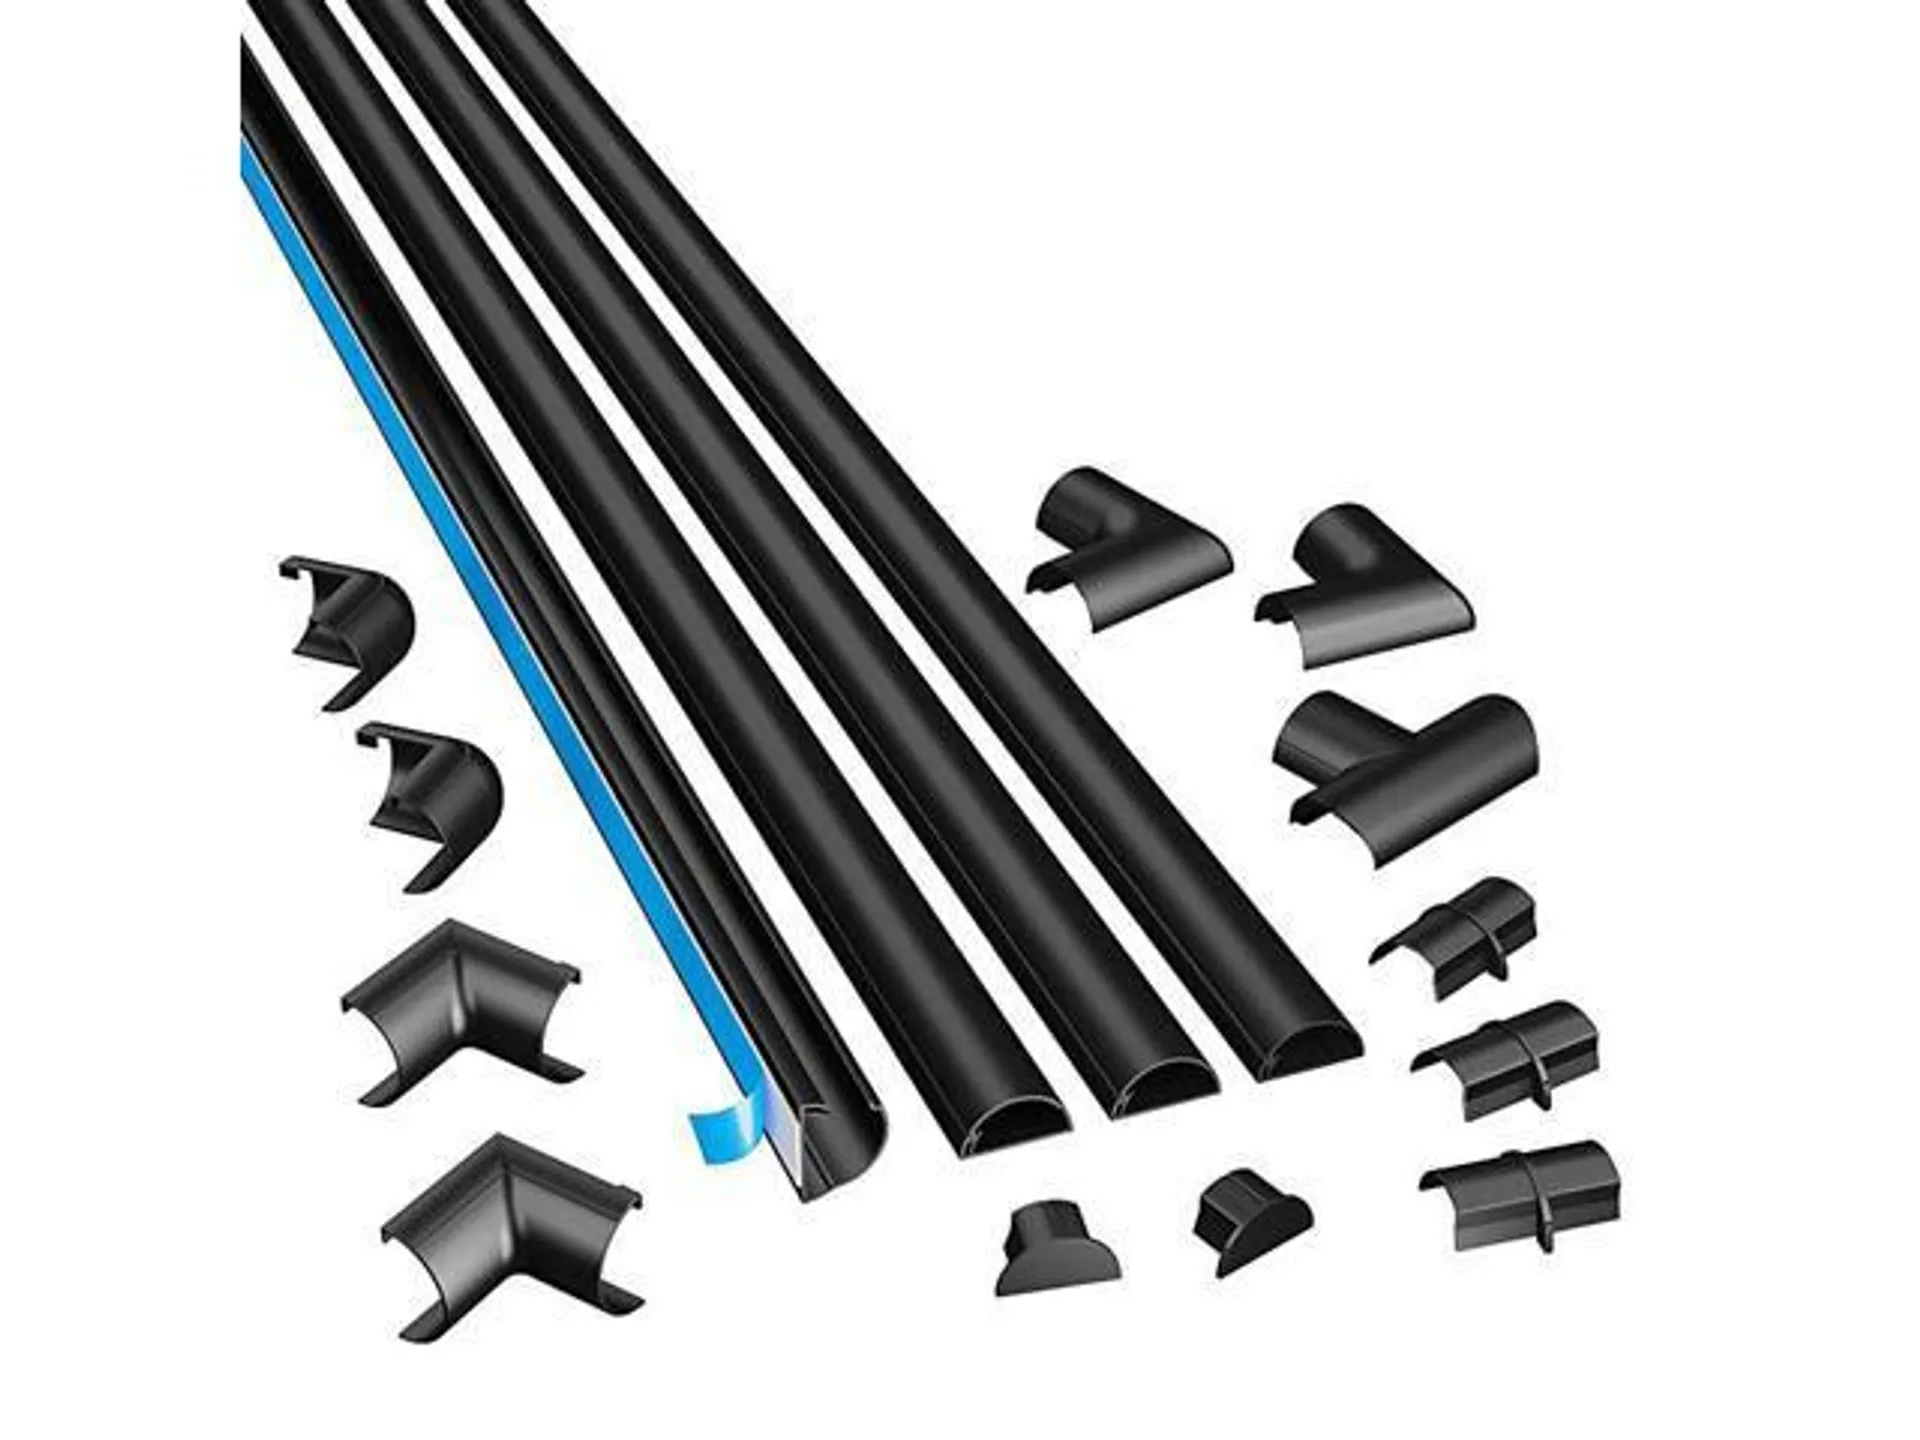 Black Medium Cord Cover Kit 13FT SelfAdhesive Wire Hider Cable Raceway to Hide Wires on Wall Cable Management 4 x 39in Lengths and Accessories